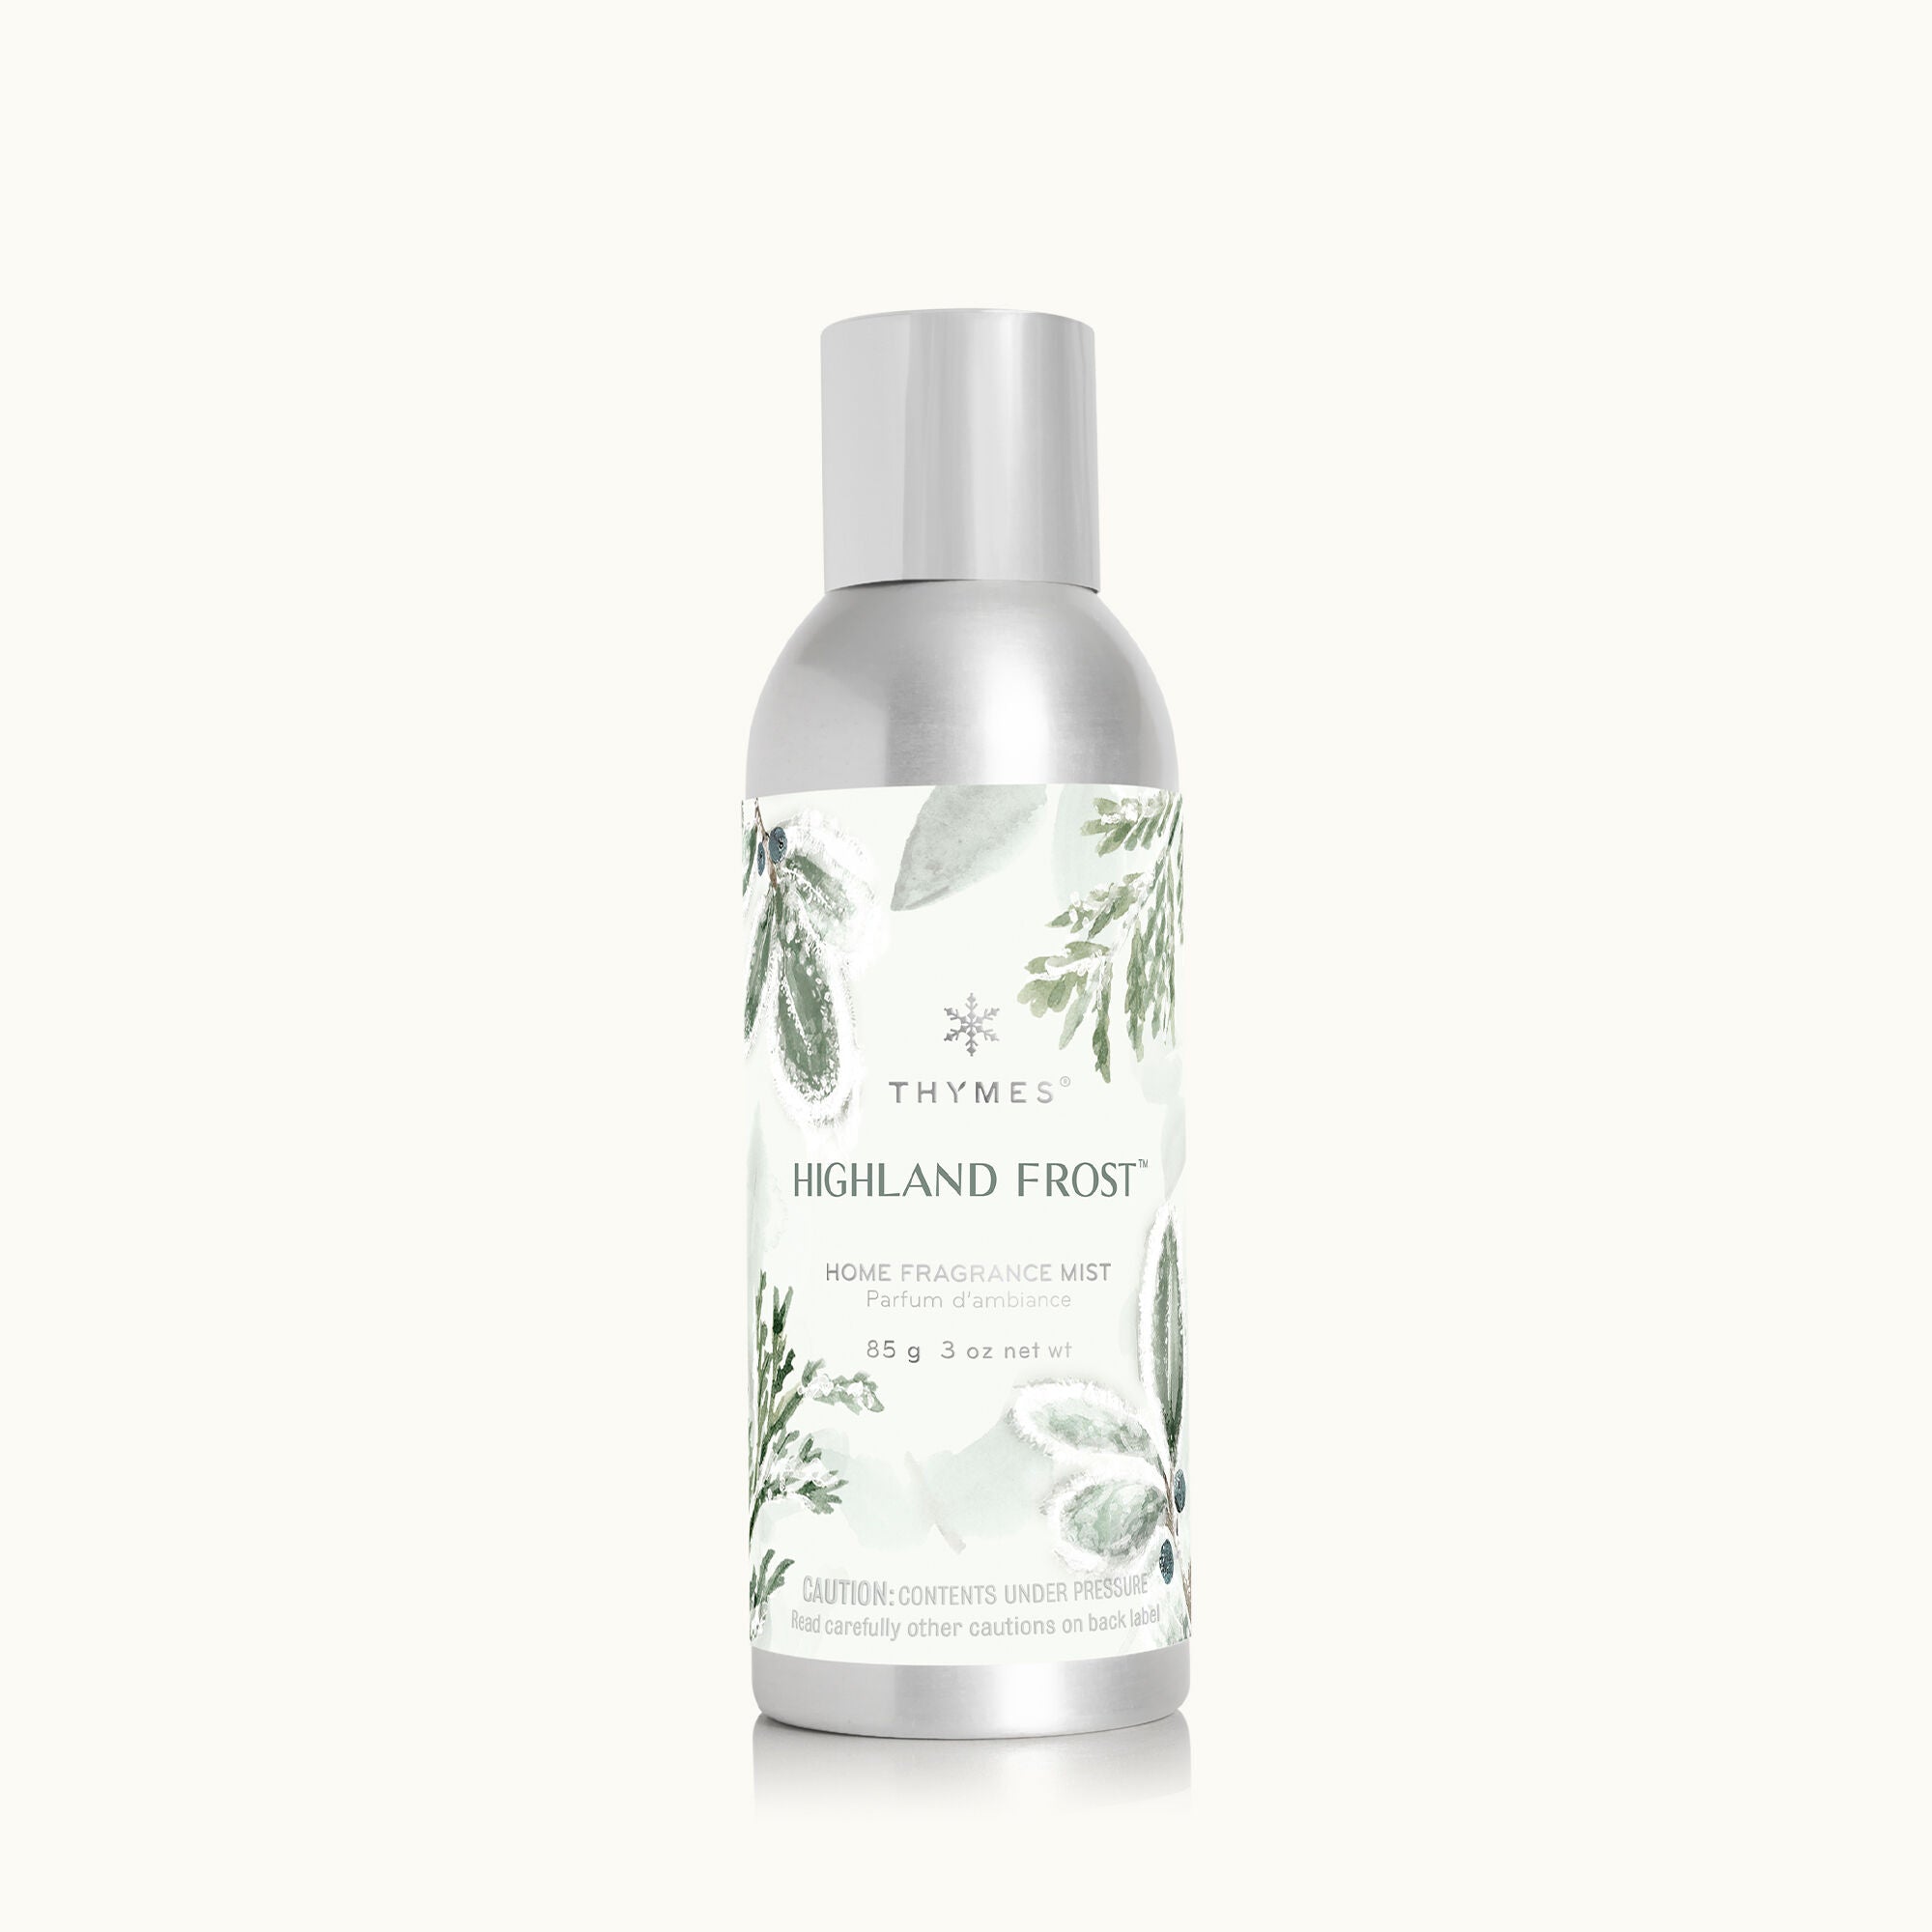 Thymes- Highland Frost Home Fragrance Mist